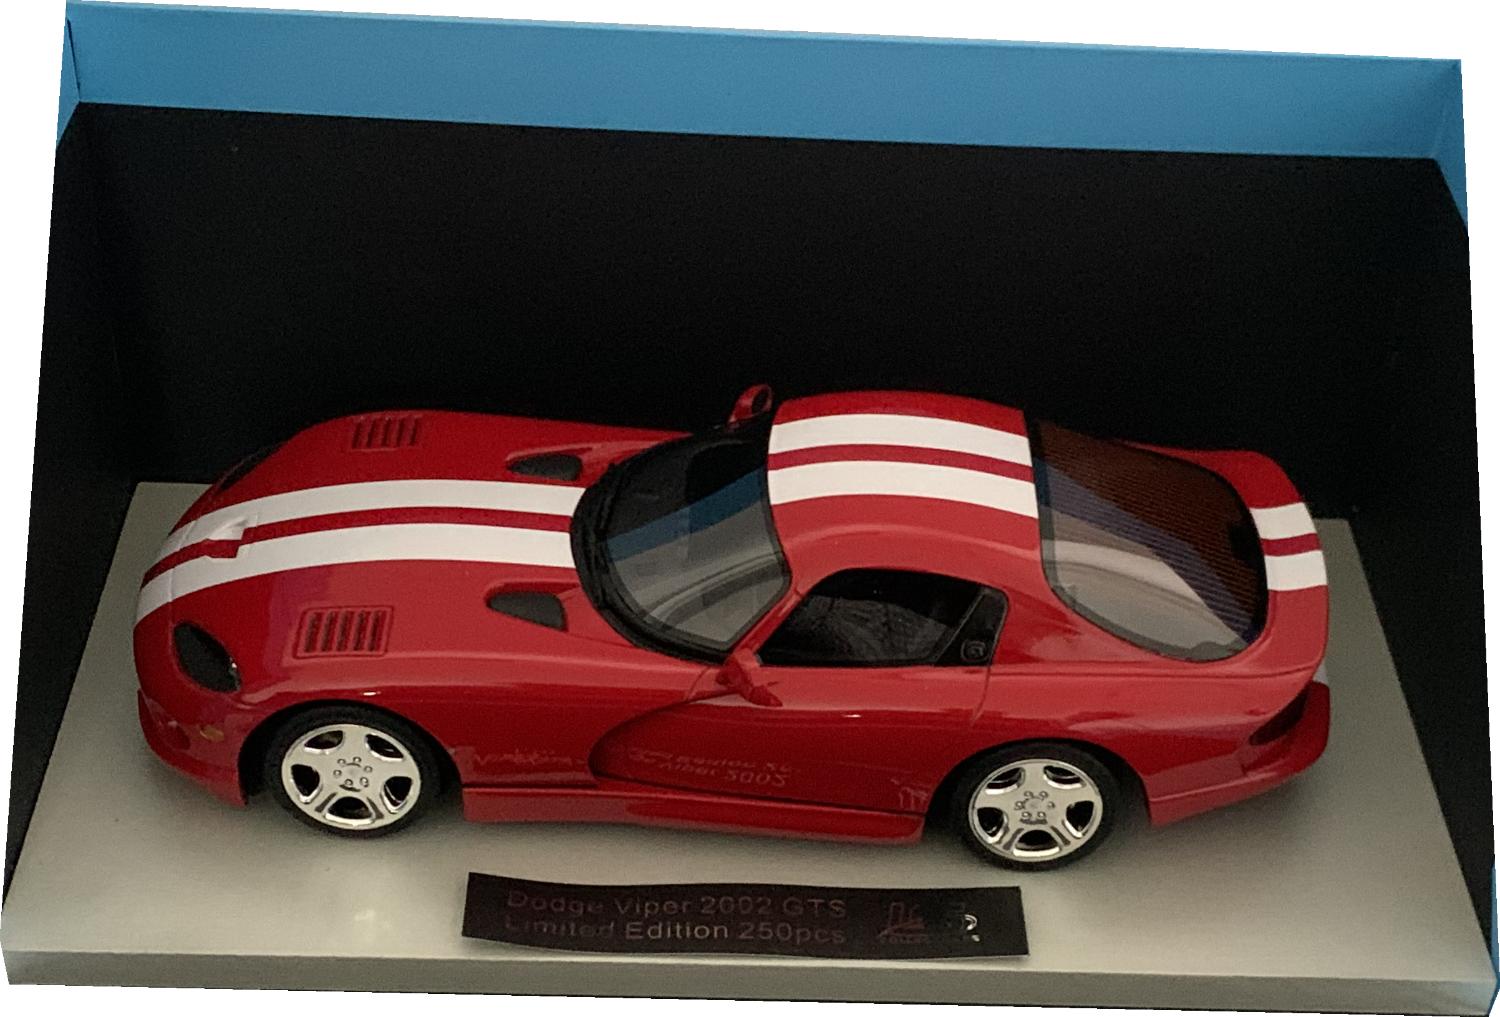 Dodge Viper GTS 2002 in red 1:18 scale model from LS Collectibles, Limited Edition of only 250 models